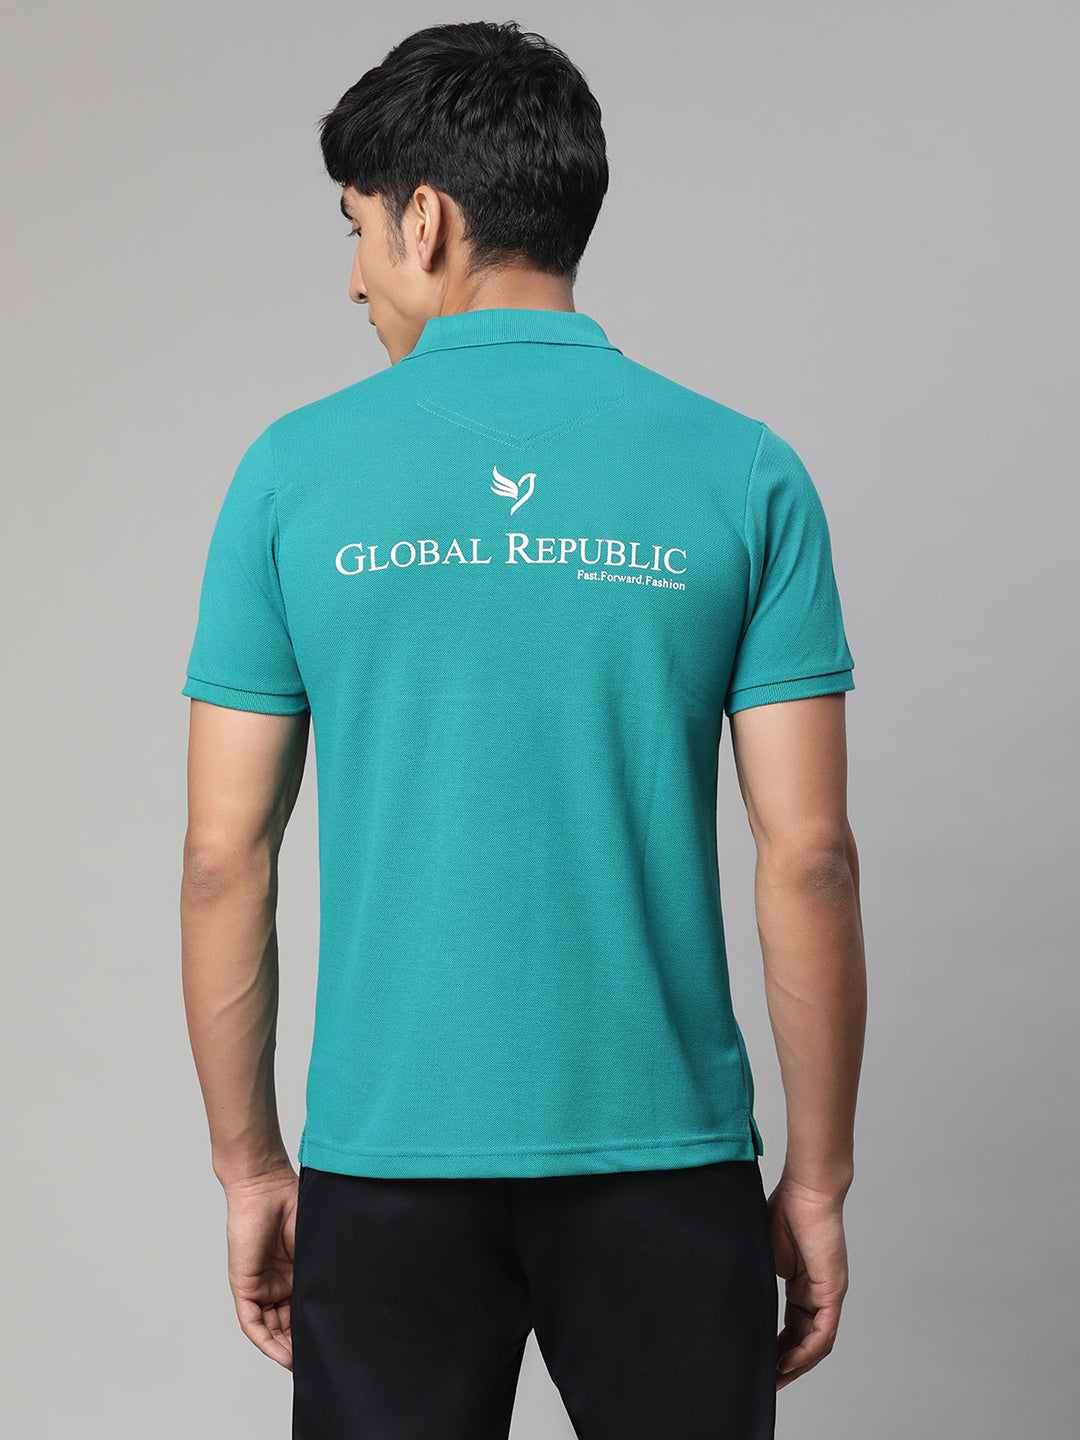 Men Teal Solid Polo T- Shirt